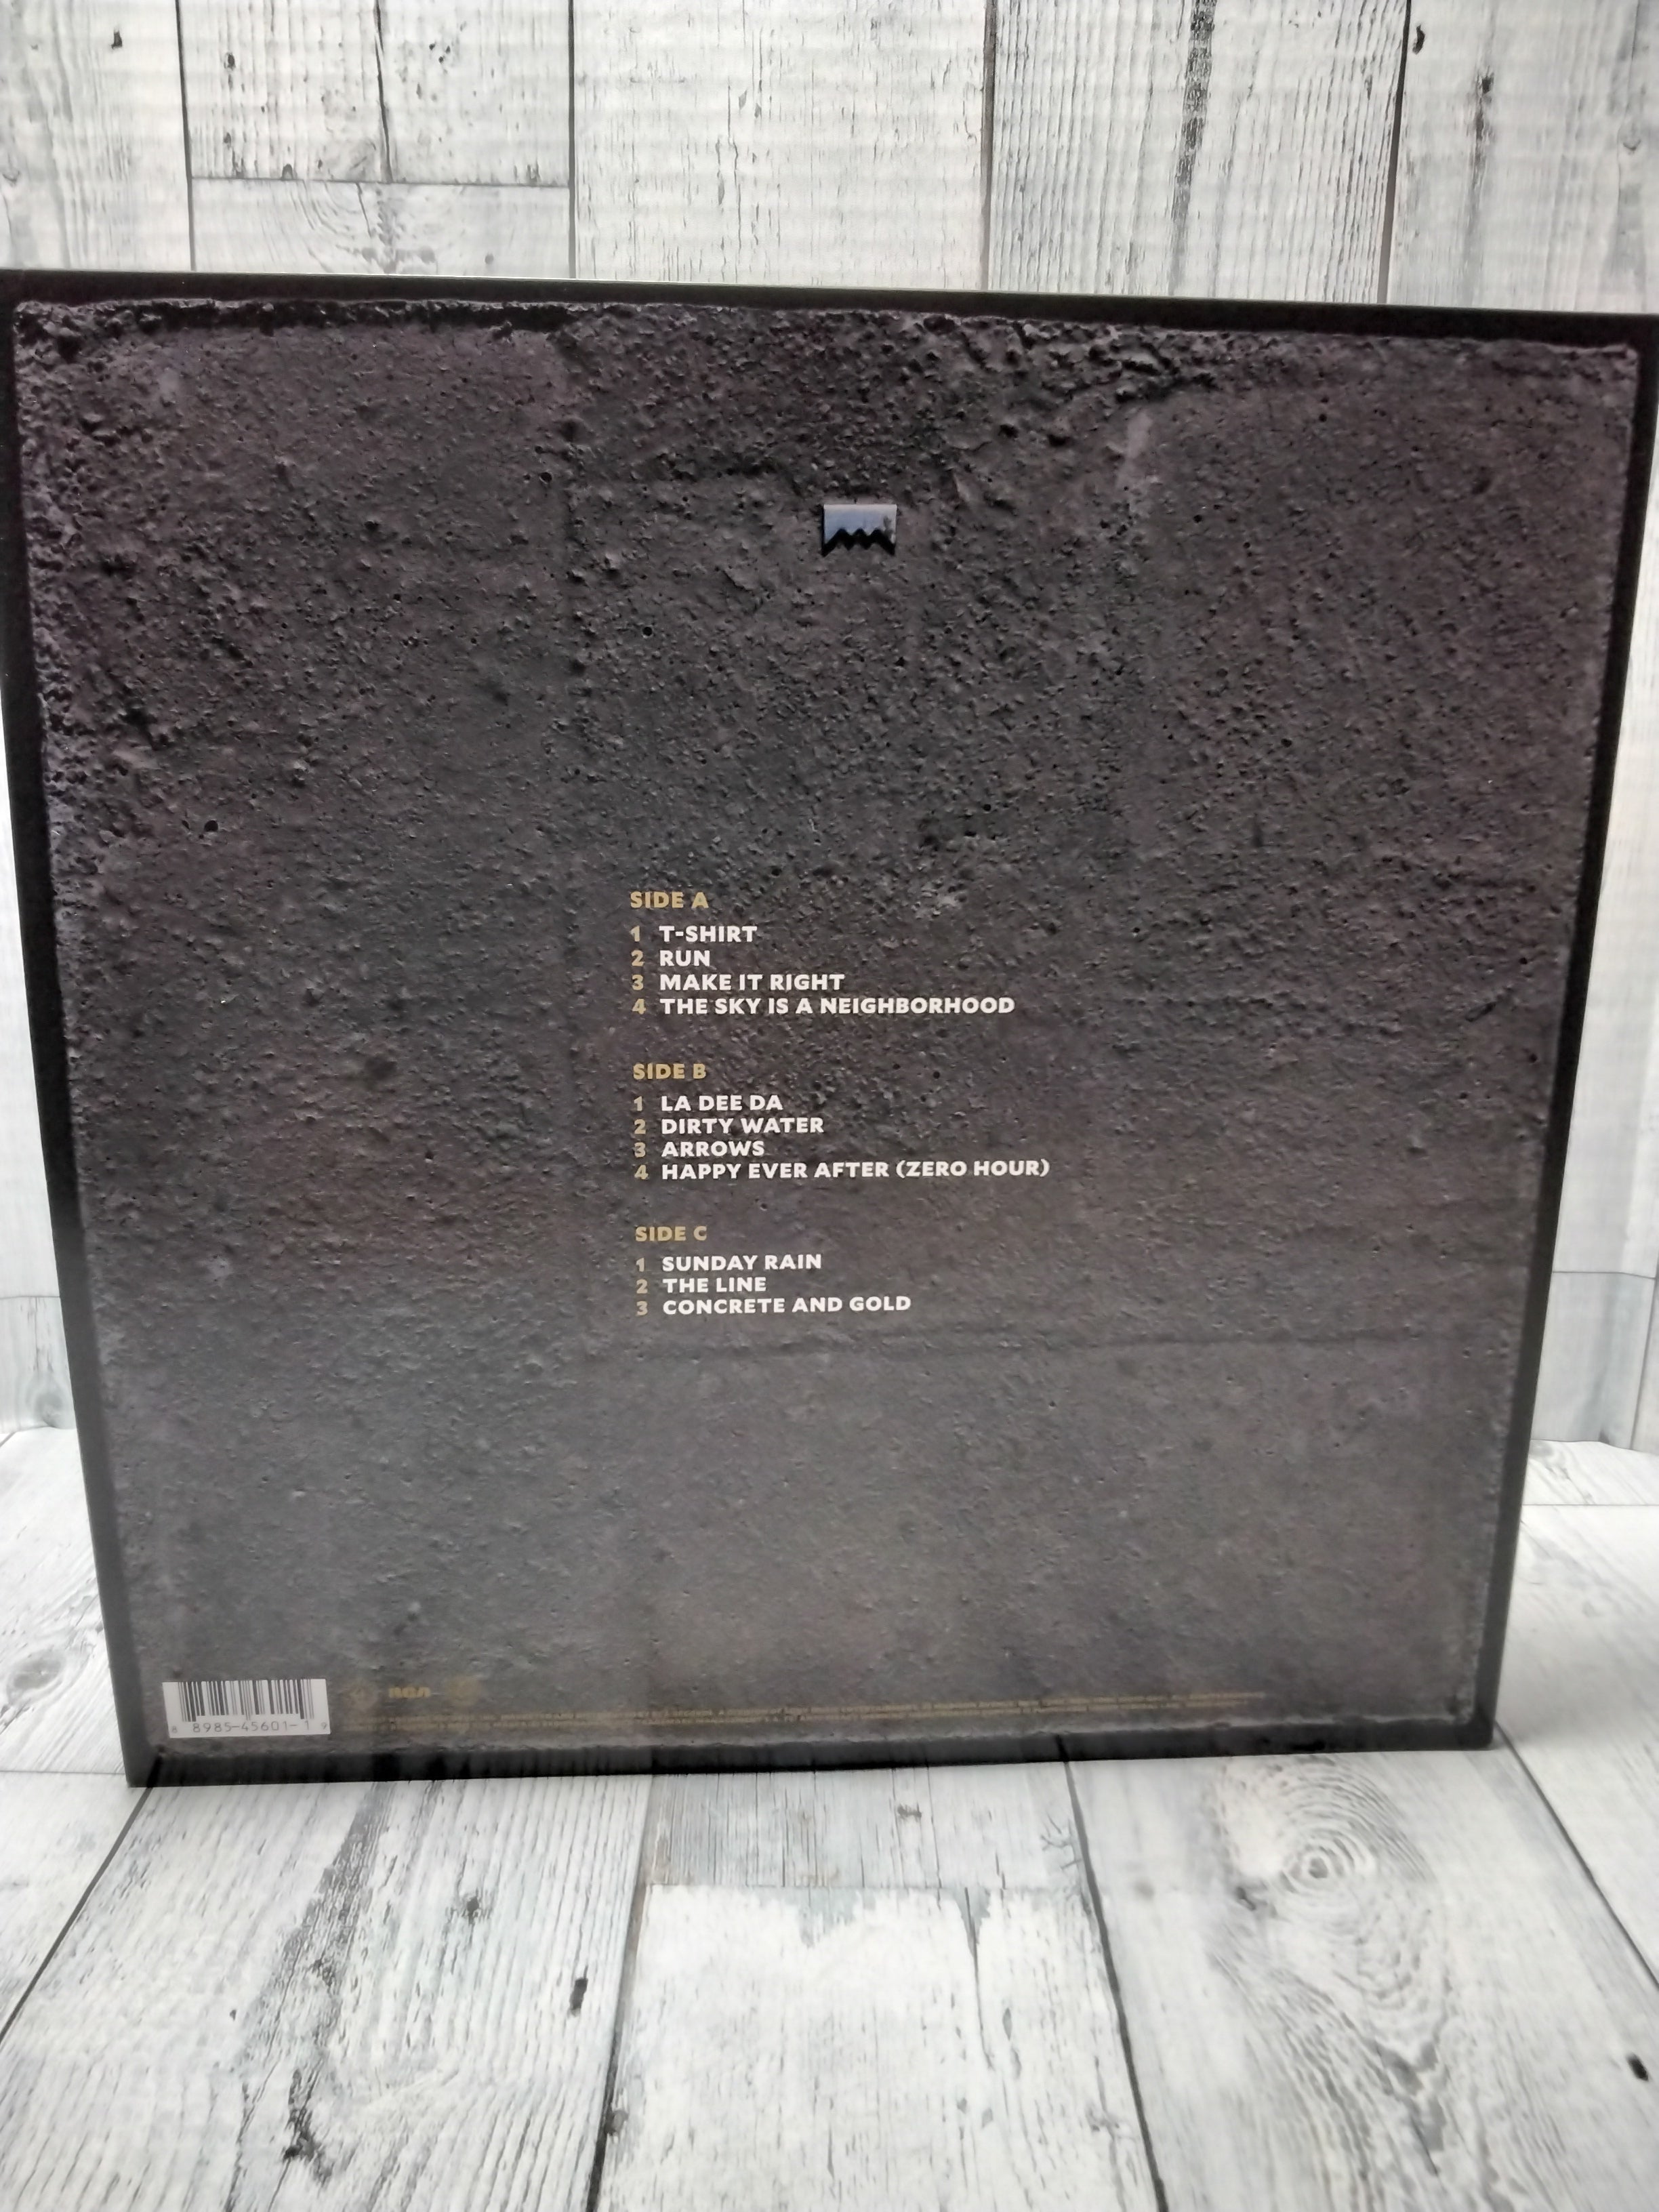 Foo Fighters - Concrete and Gold, 2LP (Vinyl) (7772306702574)